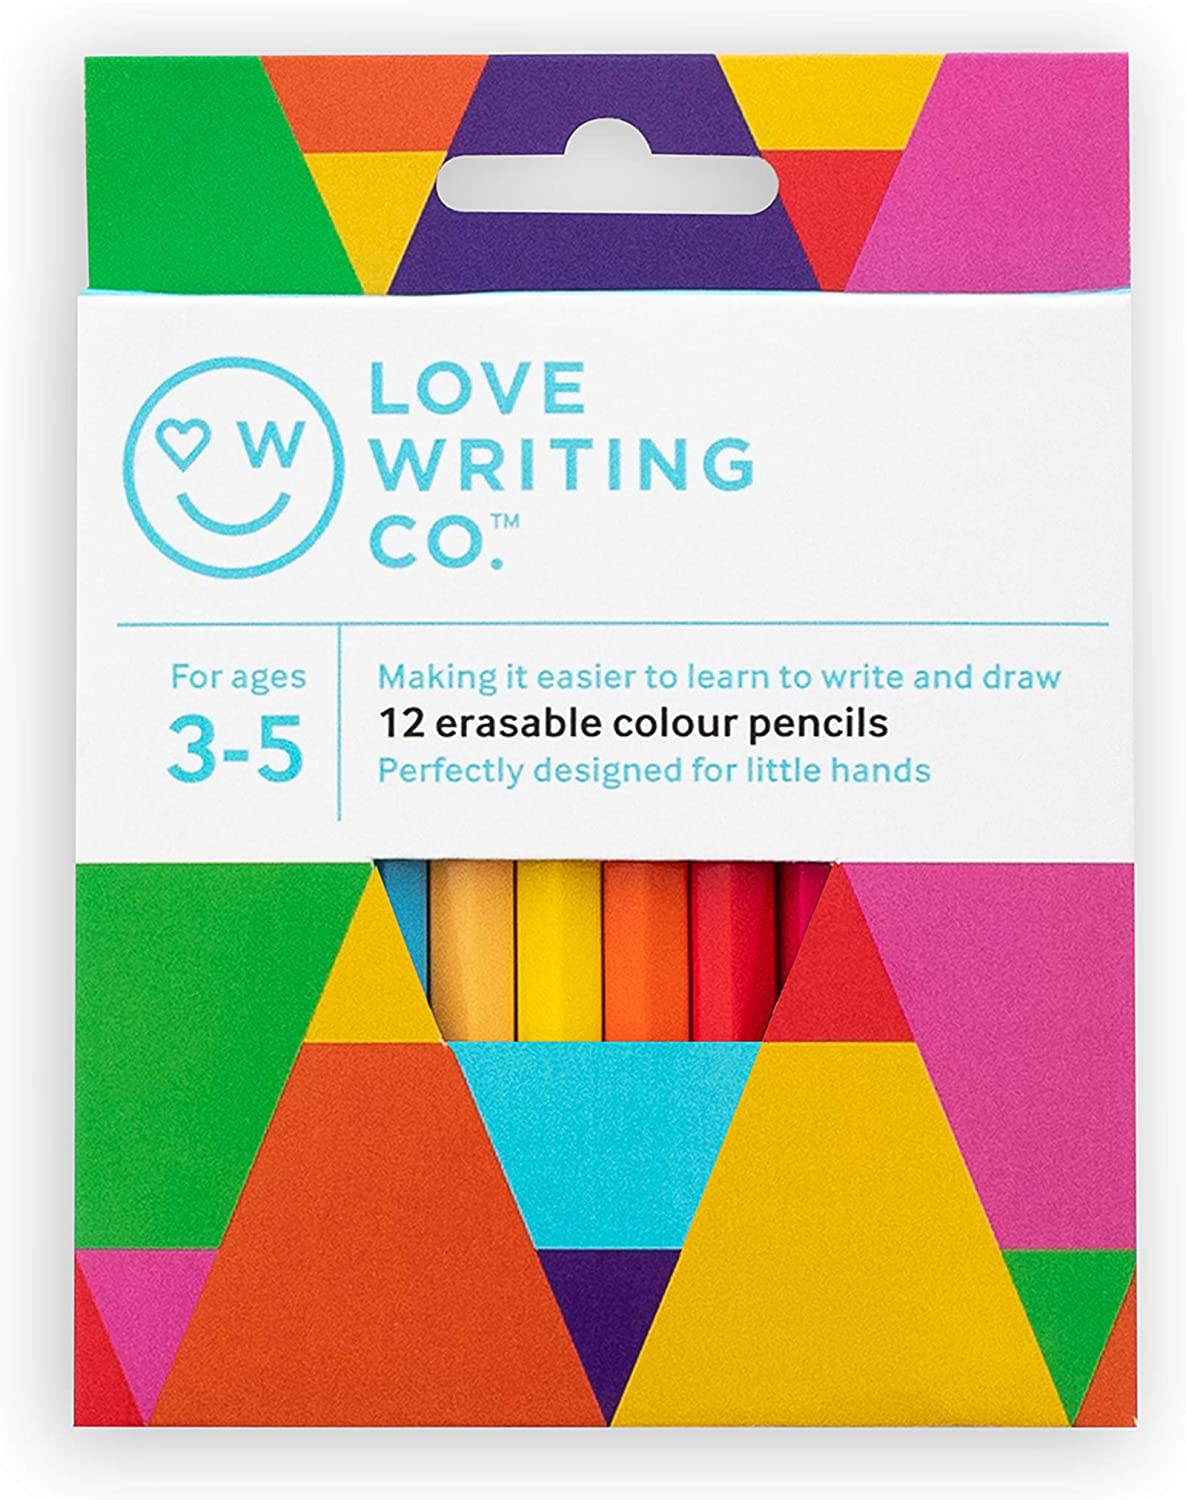 Love Writing Co. Erasable Colouring Pencils - Ages 3 to 5 (Pack of 12)